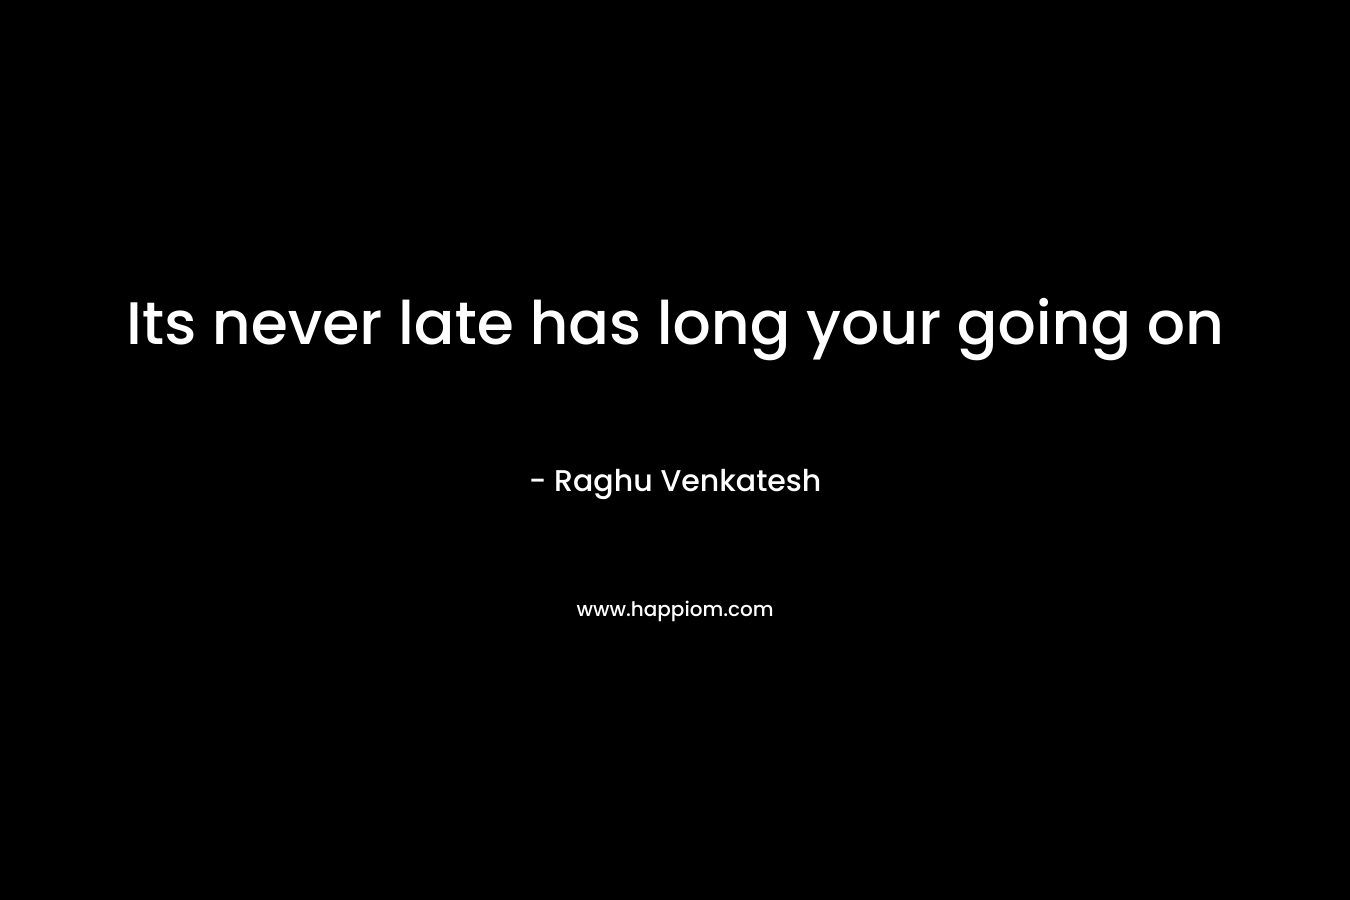 Its never late has long your going on – Raghu Venkatesh